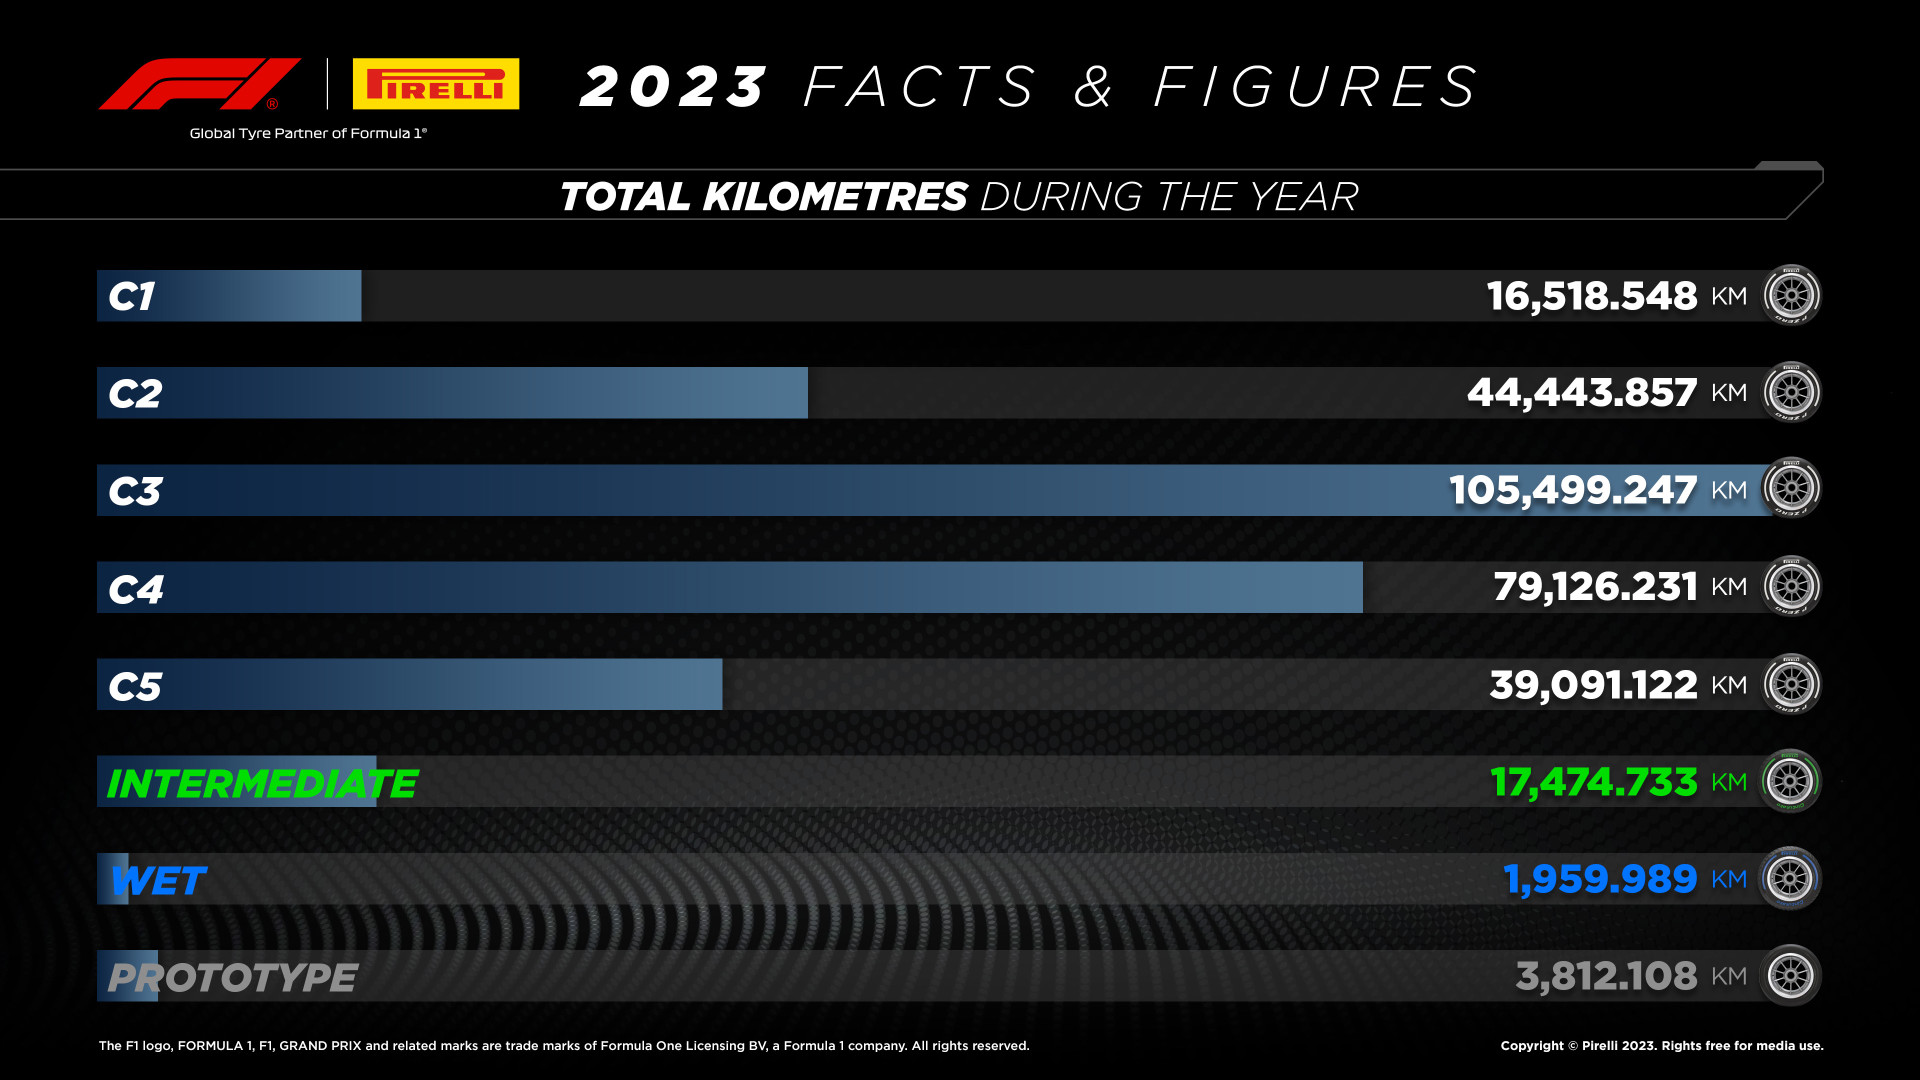 2023 Facts and Figures - Total Kilometres